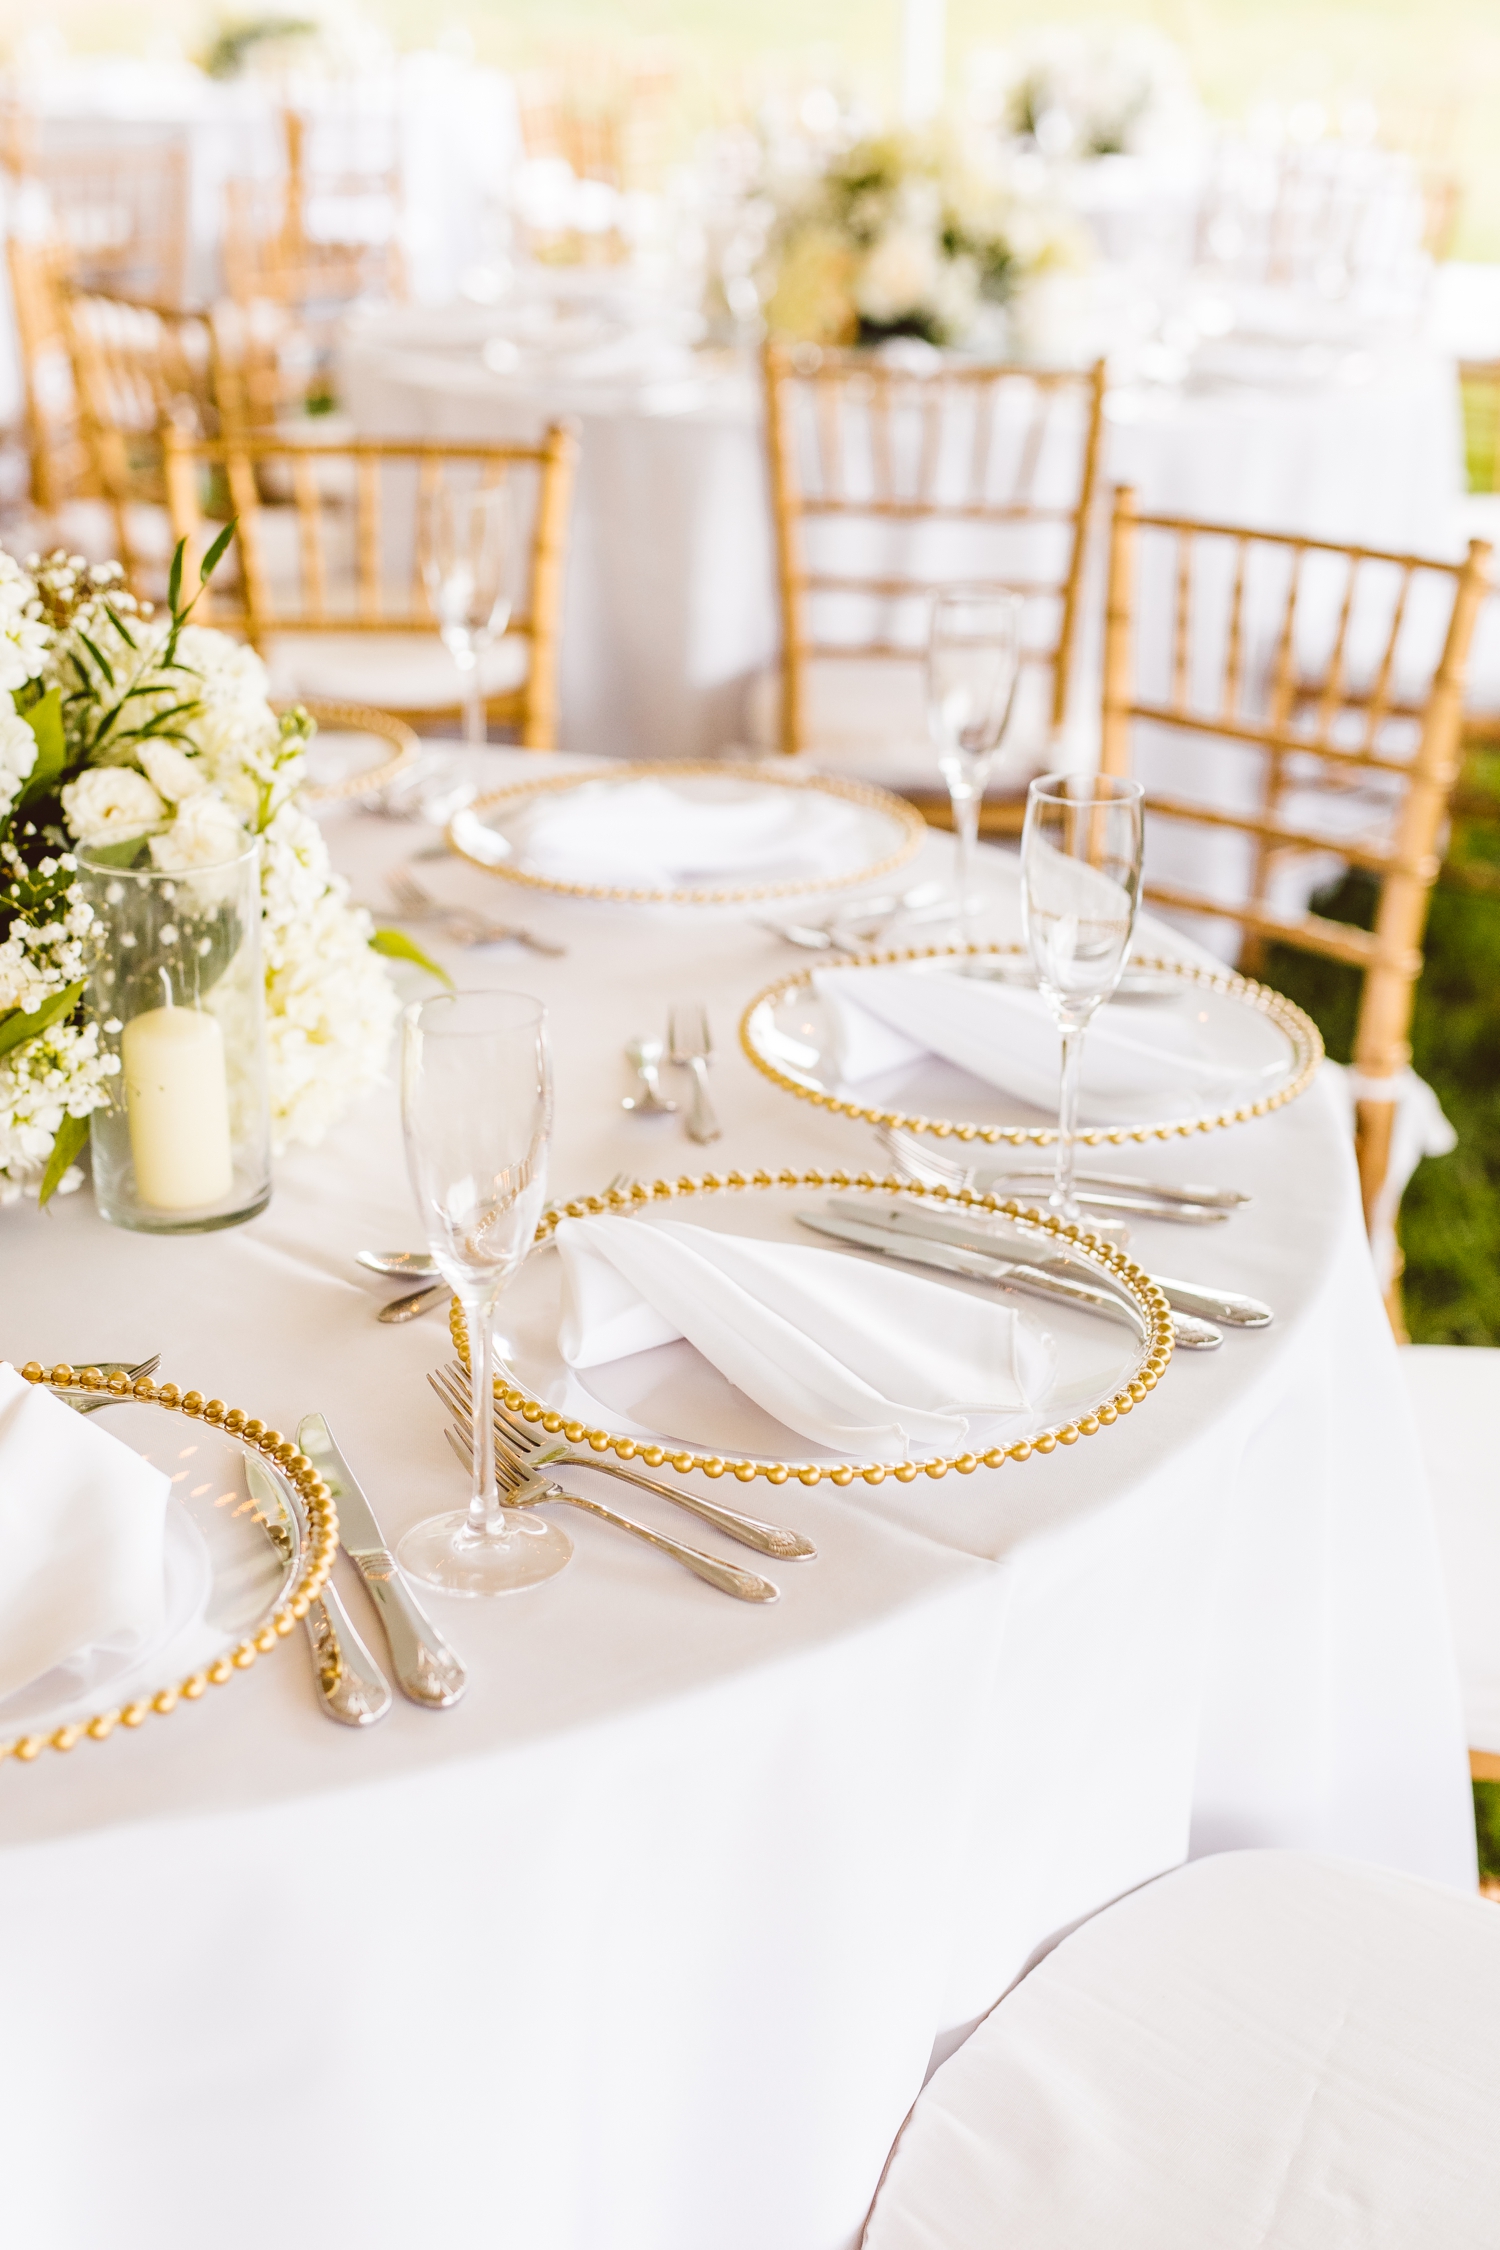 Gold chargers with gold silverware and white floral arrangements at Ladew Topiary Gardens wedding | Brooke Michelle Photo